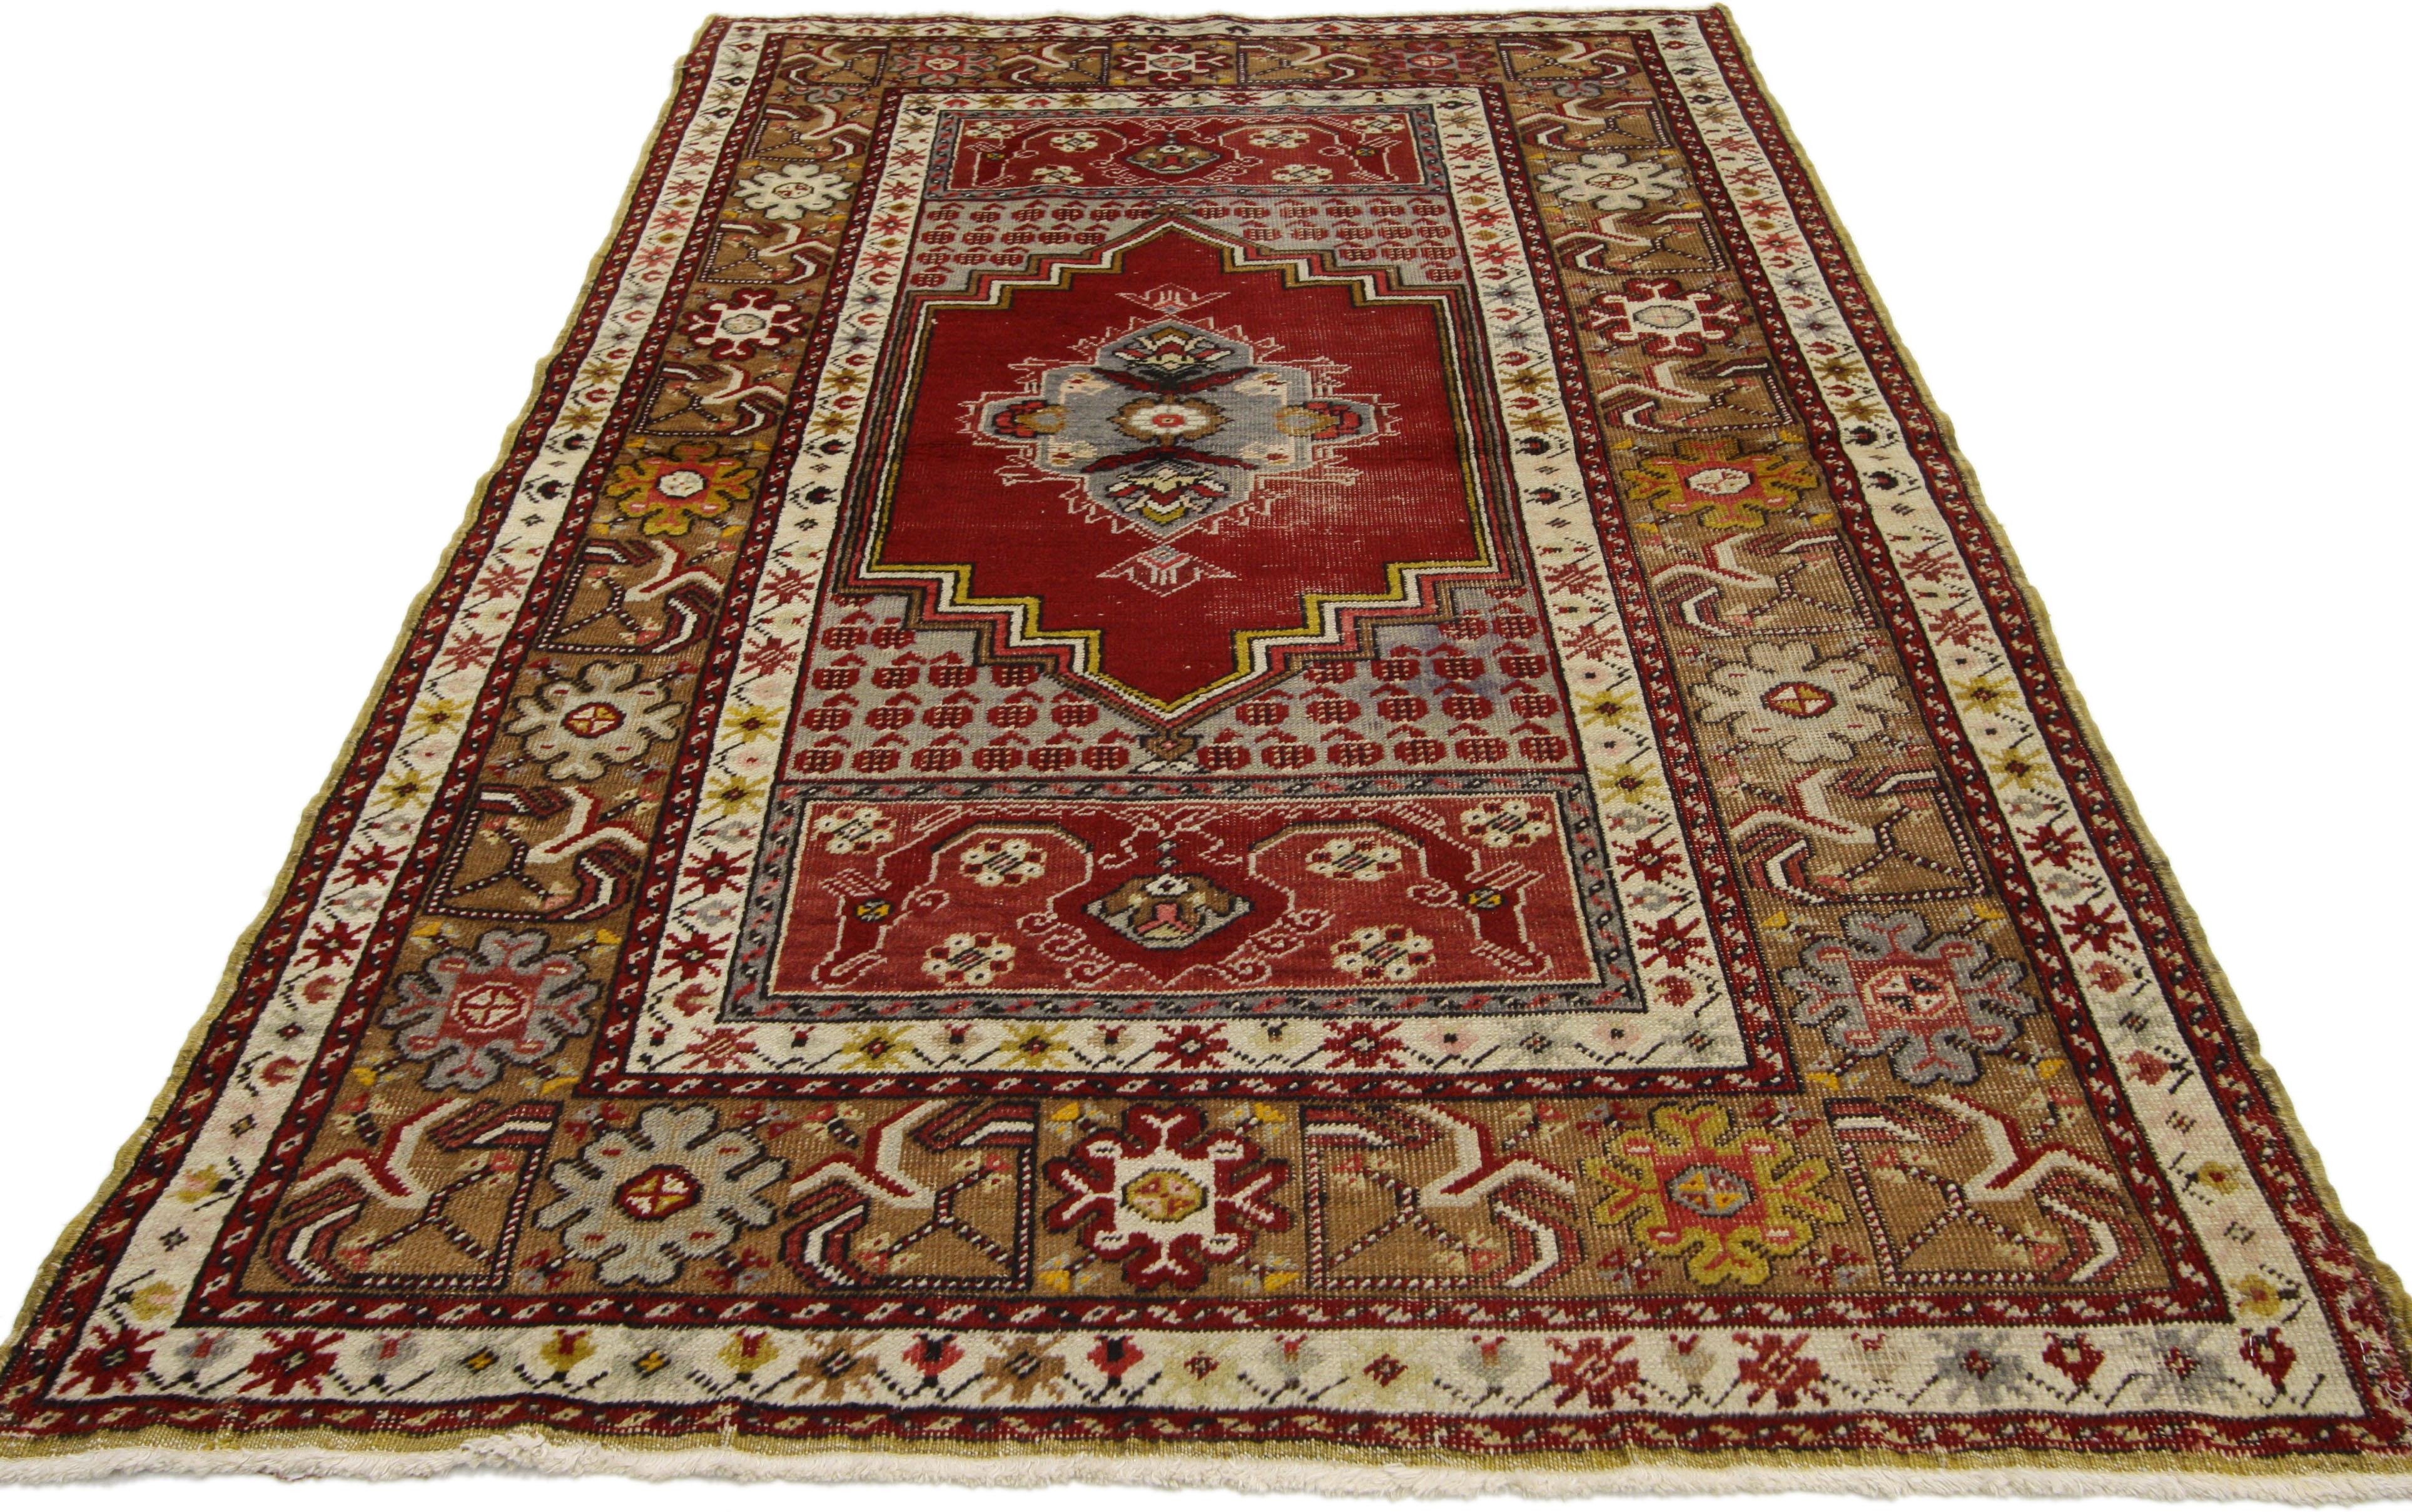 73869, vintage Turkish Oushak rug entry or foyer rug 03'06 x 05'08. This vintage Turkish Oushak rug features a modern traditional style. Immersed in Anatolian history and refined colors, this vintage Turkish Oushak rug combines simplicity with